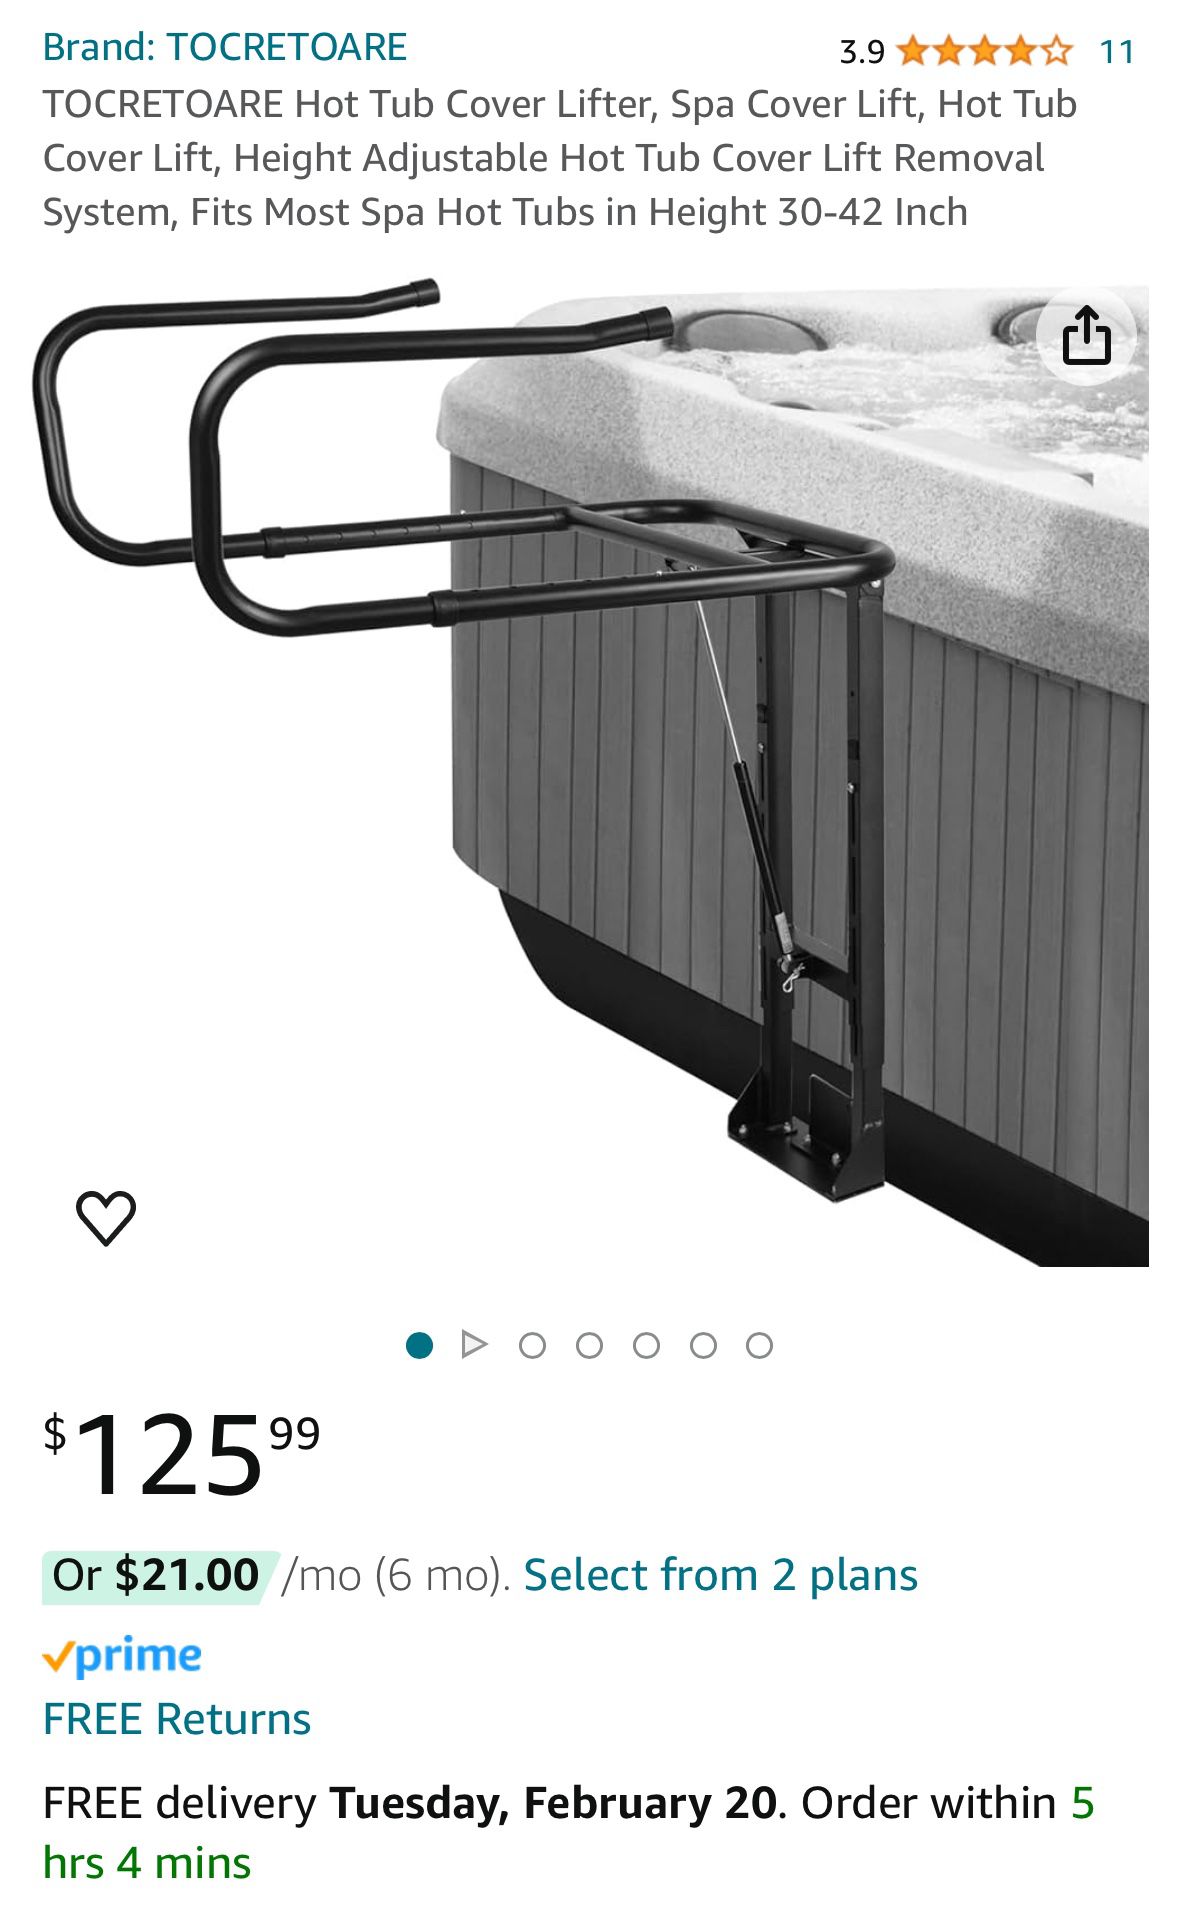 HOT TUB HYDRAULIC COVER LIFTER